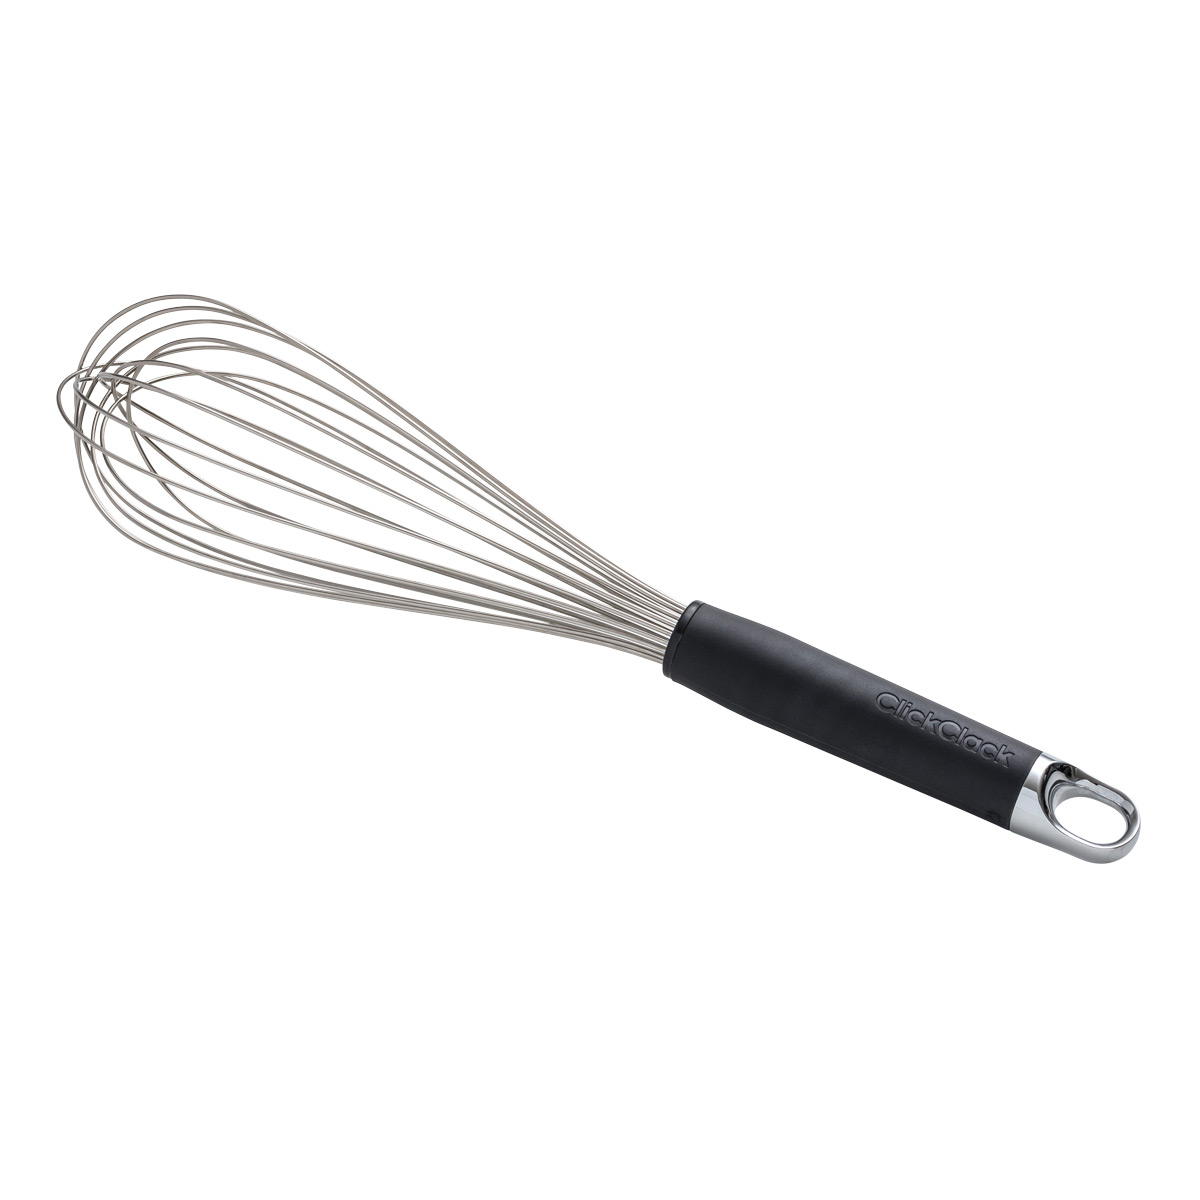 https://www.containerstore.com/catalogimages/424358/10086130-Large--Whisk-VEN.jpg